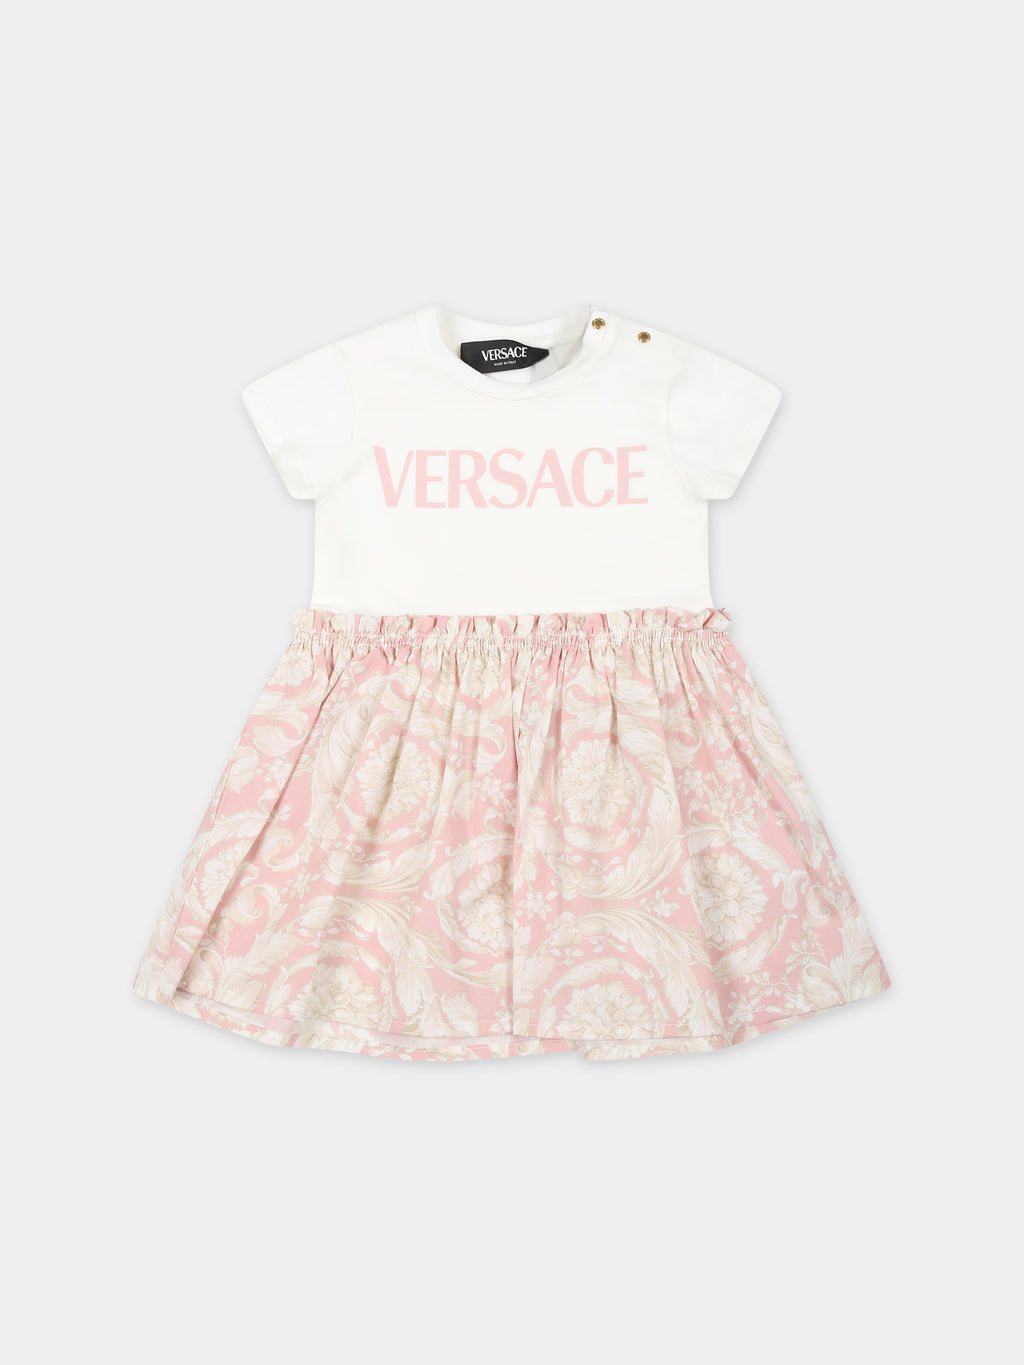 Pink dress for baby girl with logo and Baroque print